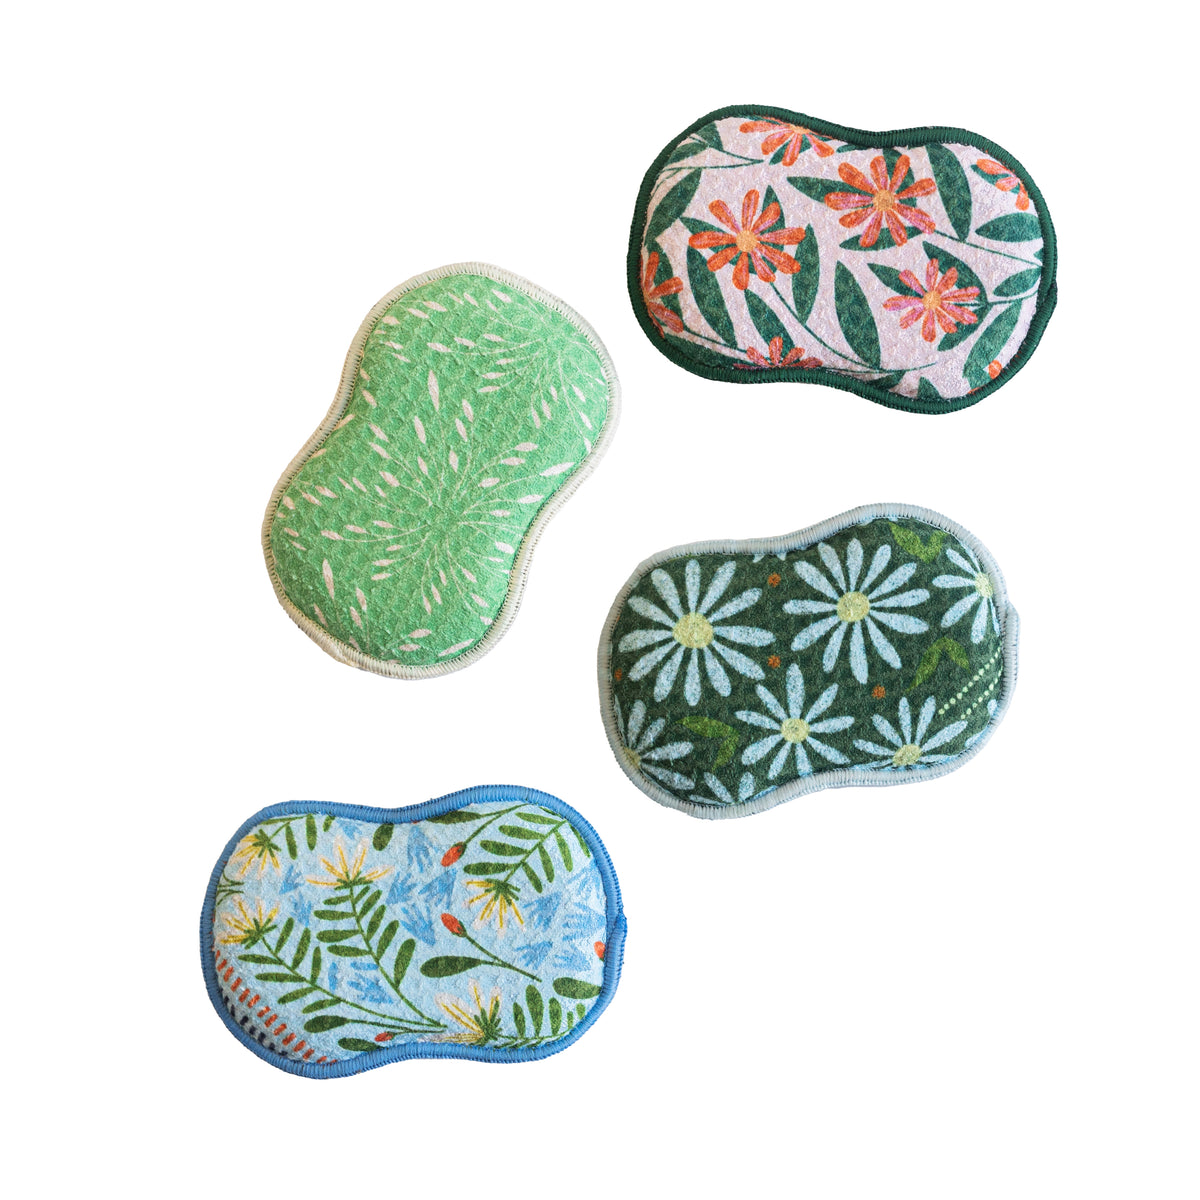 Assorted RE:usable Sponges (Set of 3) - Rebecca Jane Woolbright Collection Spring Fling Sponges &amp; Scouring Pads Once Again Home Co.   